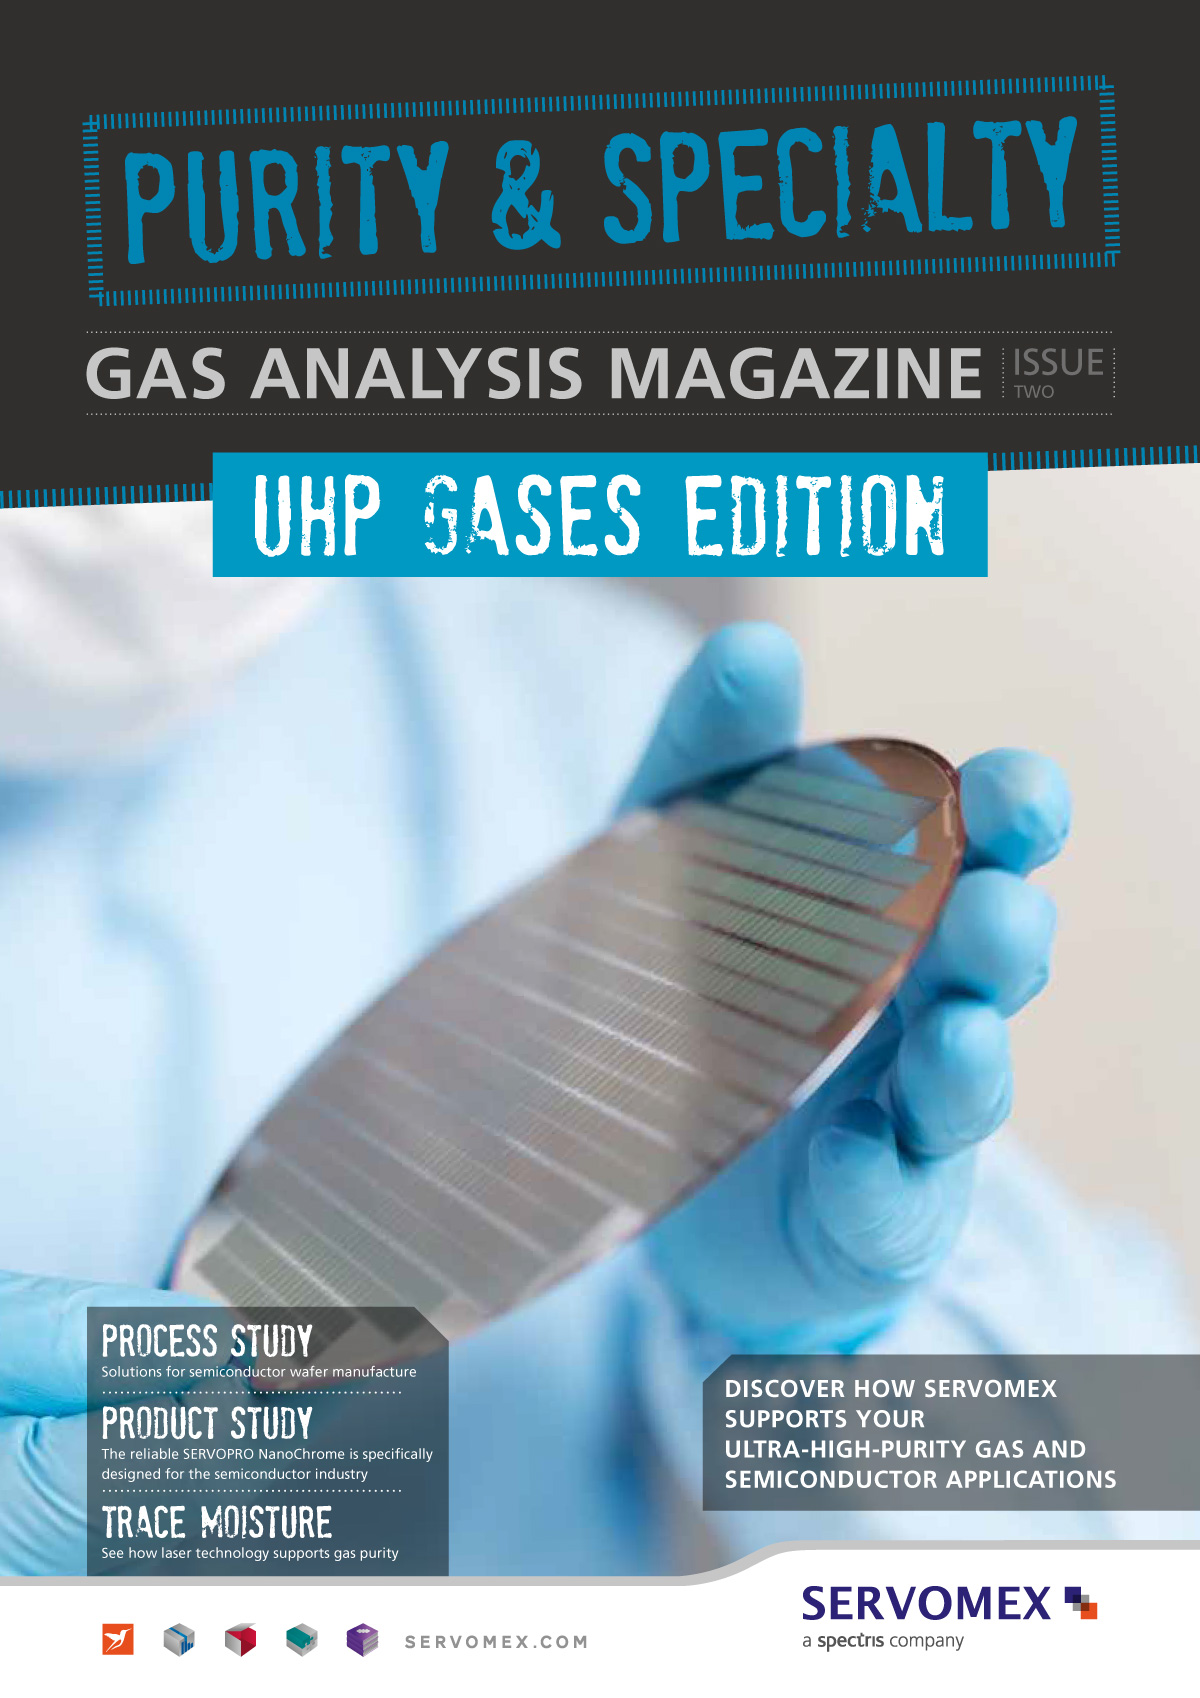 SERVOMEX Gas Analysis Magazine – Issue 2 (Purity & Specialty) - Check out the SERVOMEX ’s latest news in UHP Gas, Issue 2 (Purity & Specialty).